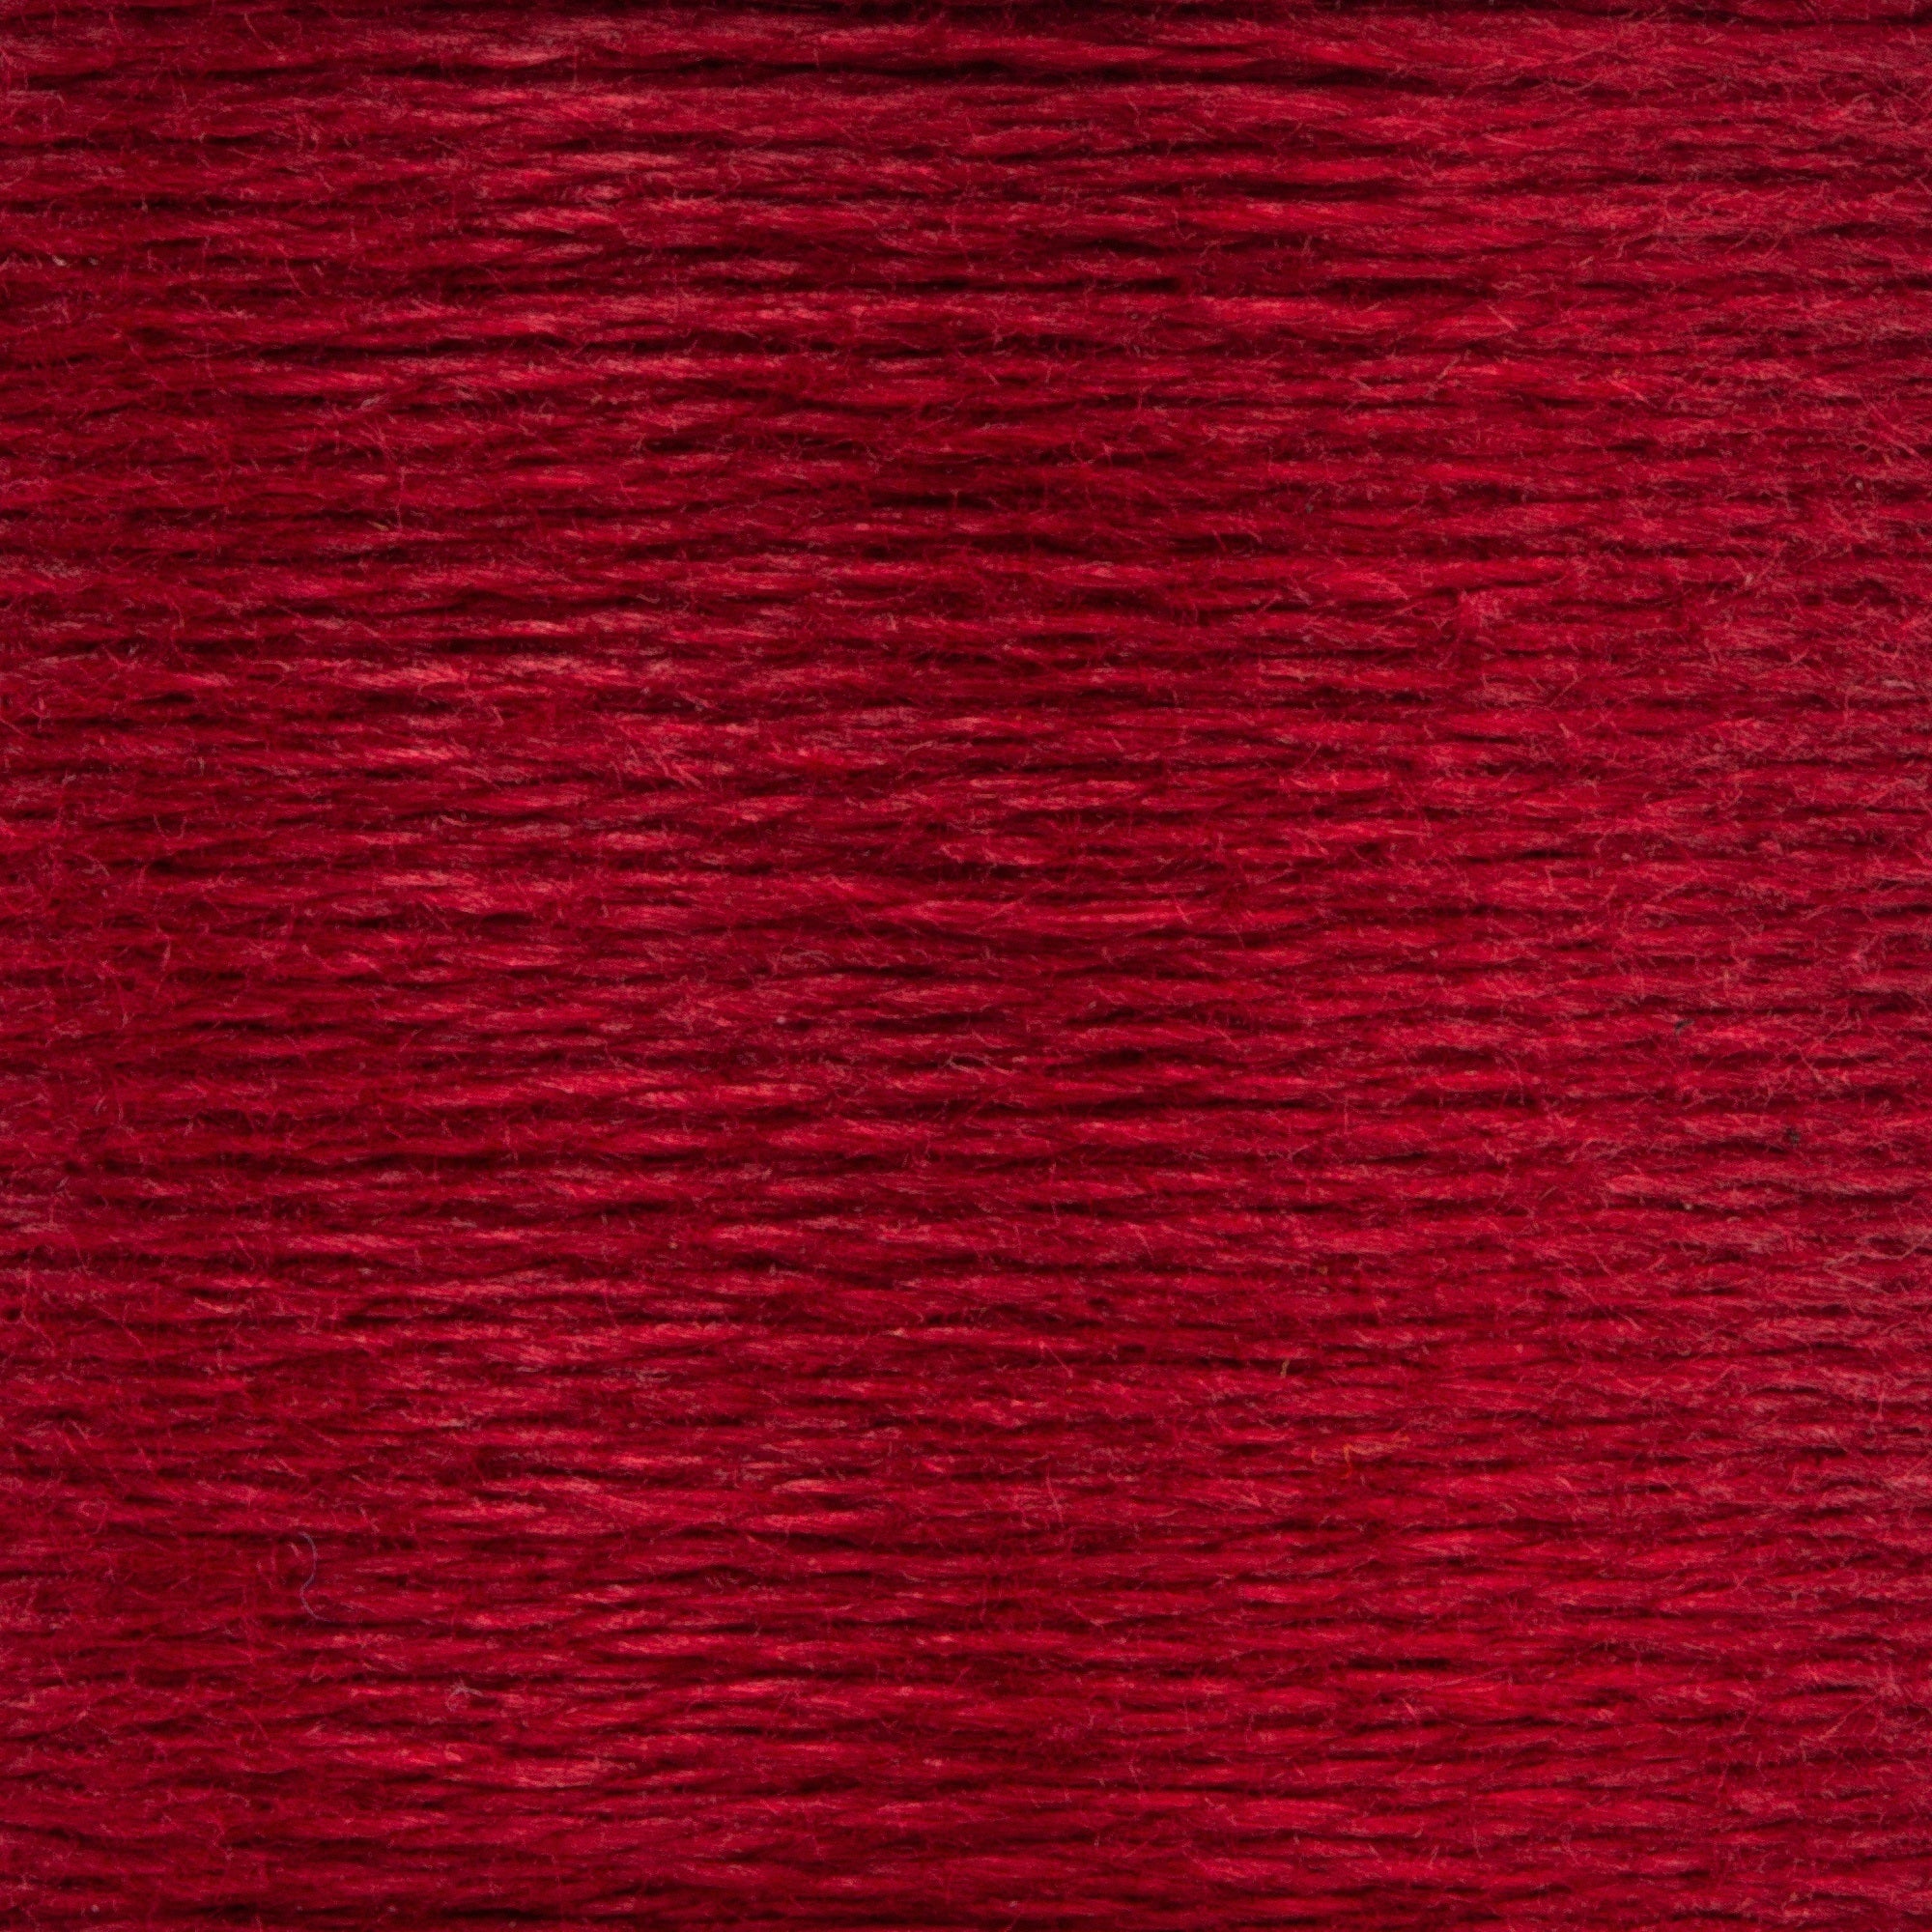 Anchor Embroidery Floss in Carmine Rose Dk